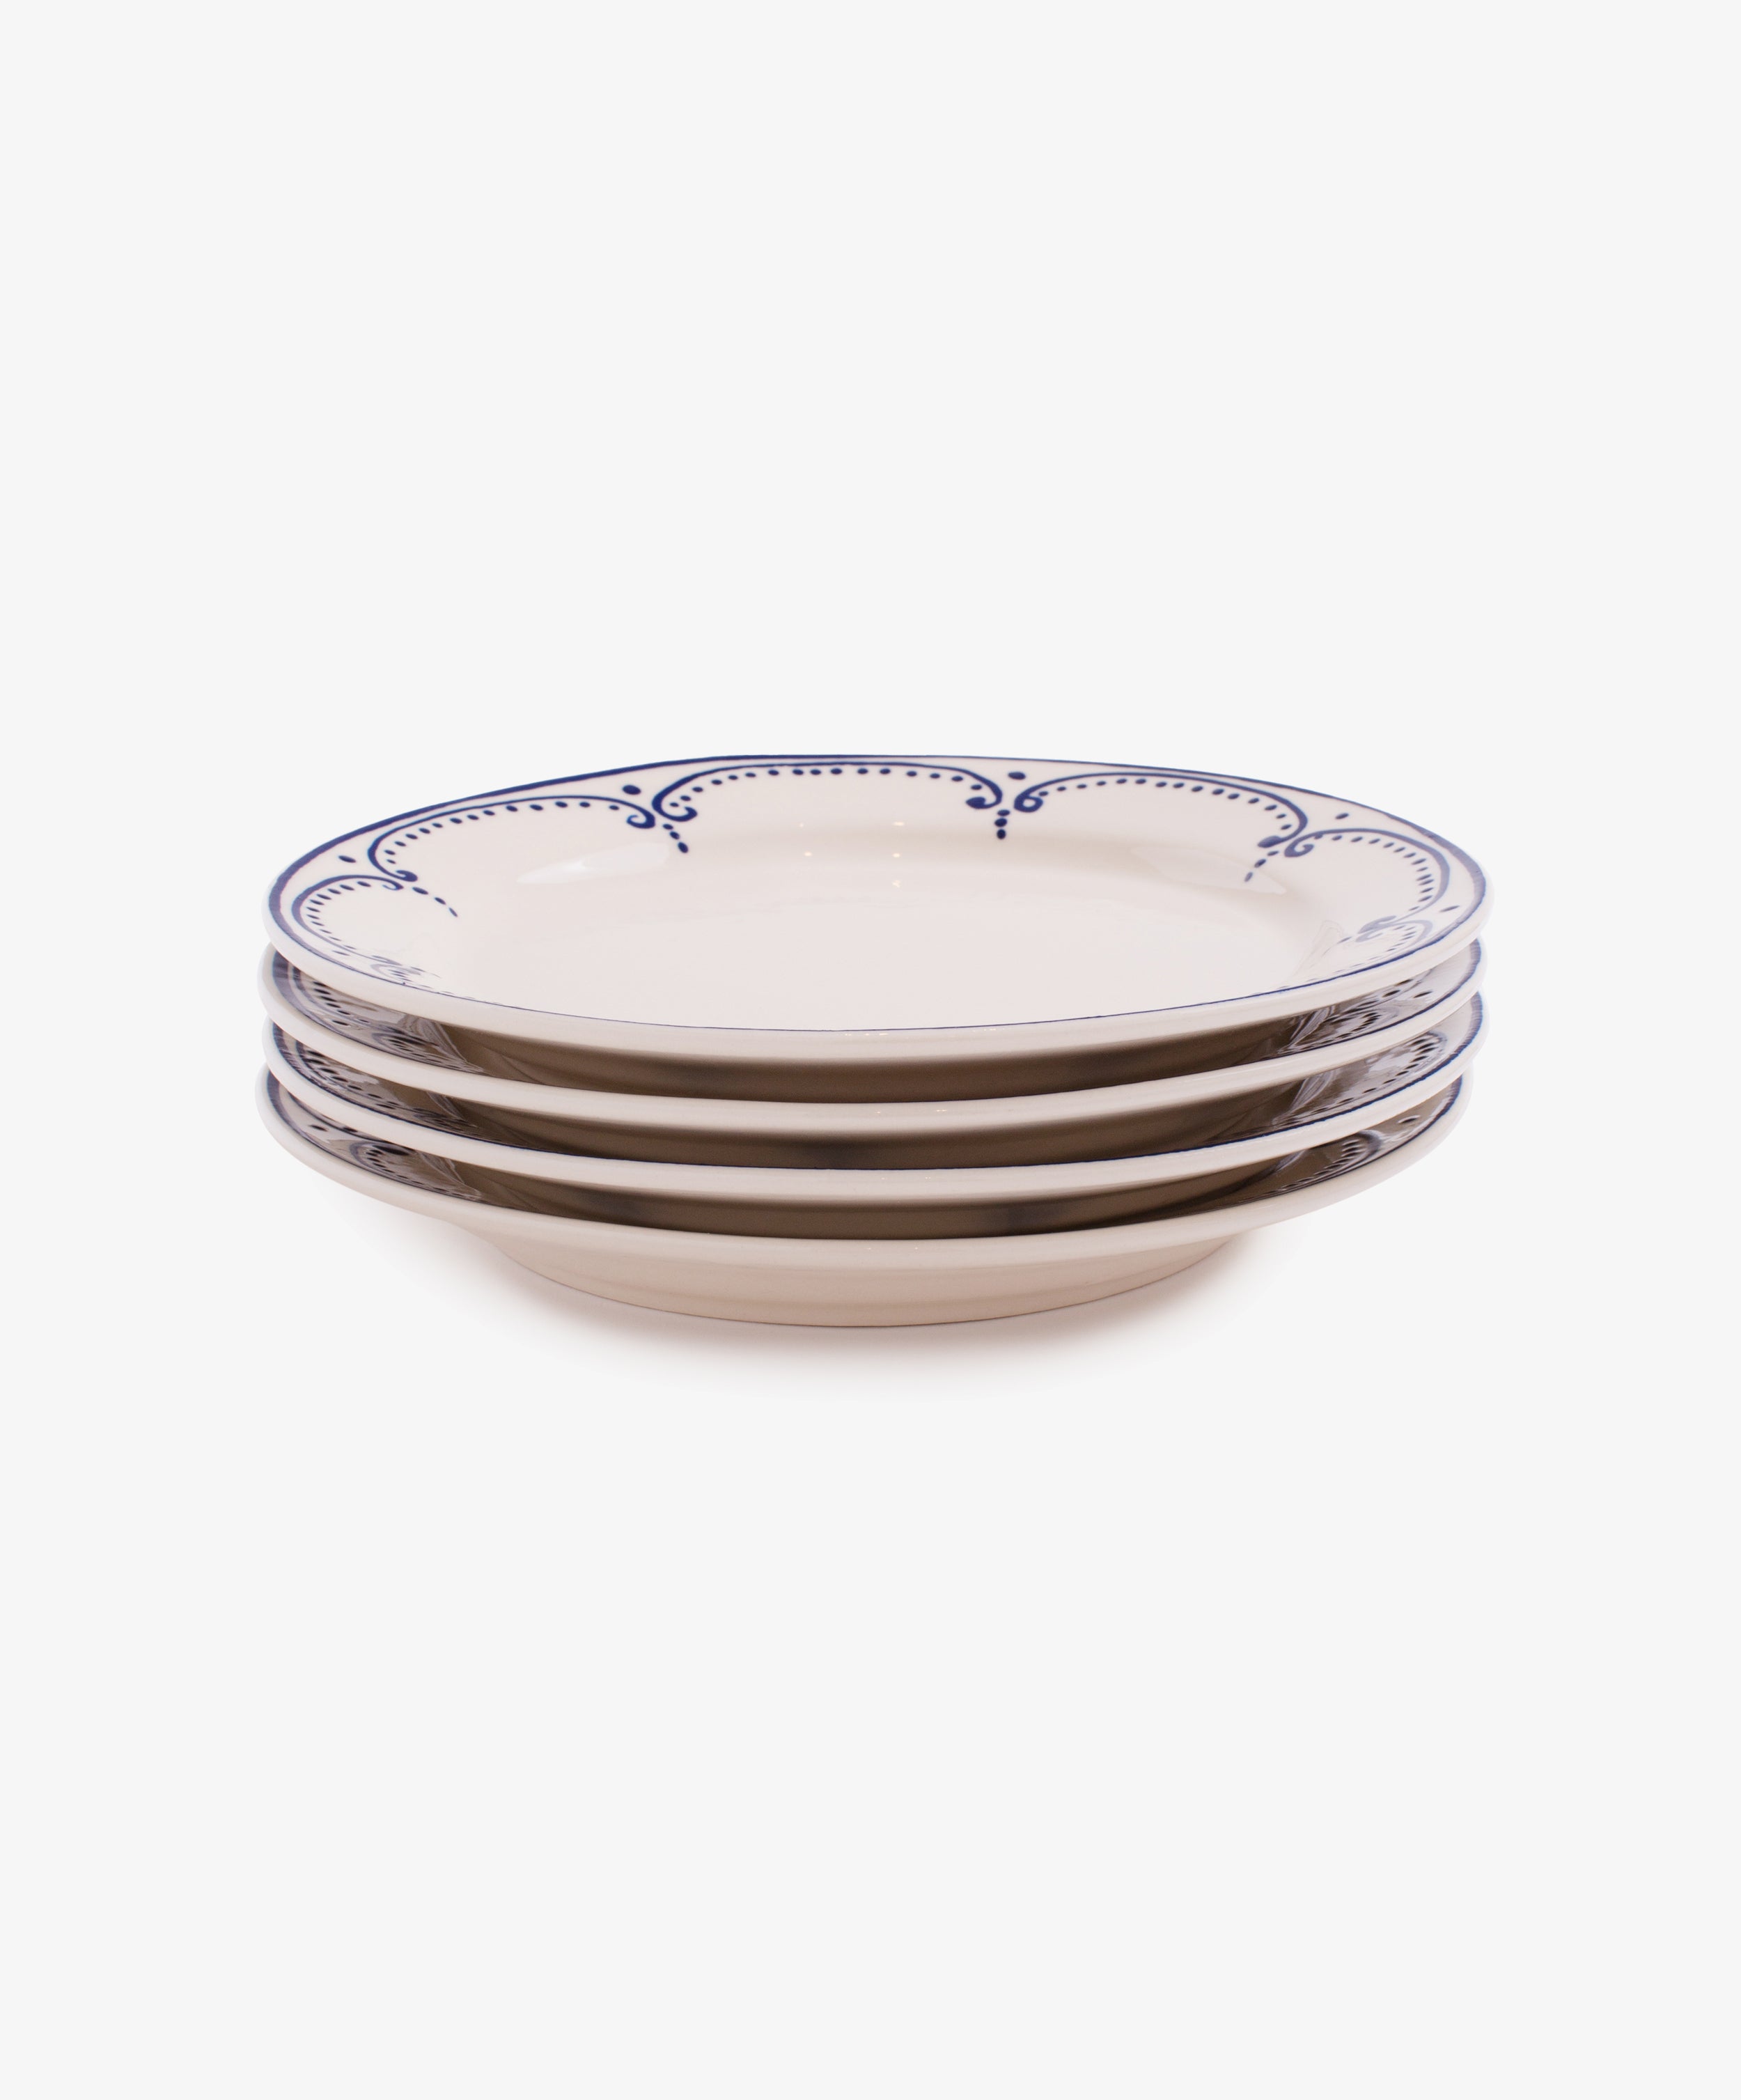 Arco Small Plate, Set of 4